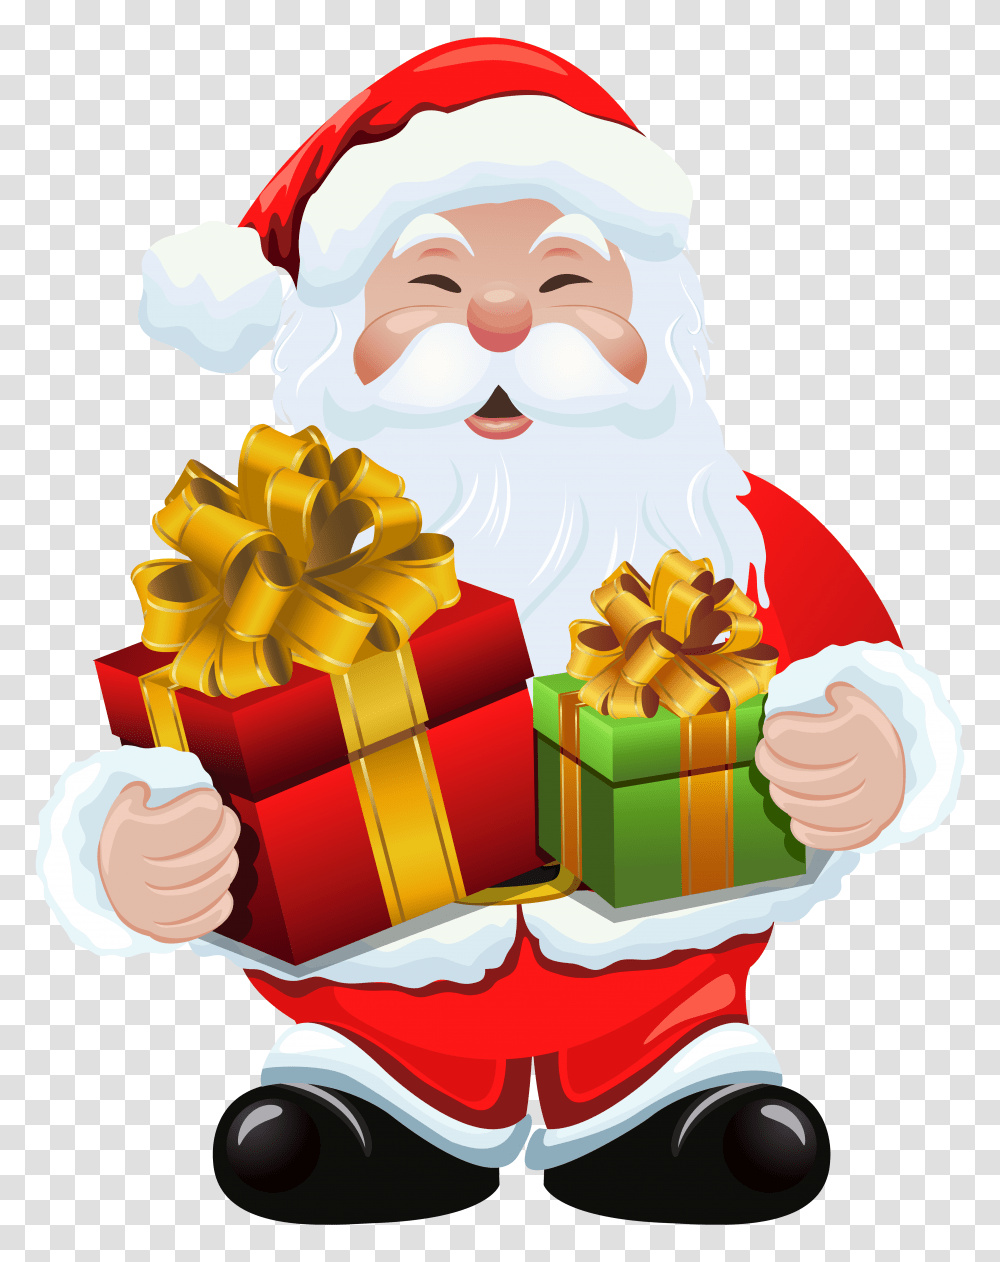 Download Hd Claus With Gifts Clipart Image Gallery Santa Claus With Gifts, Birthday Cake, Dessert, Food Transparent Png